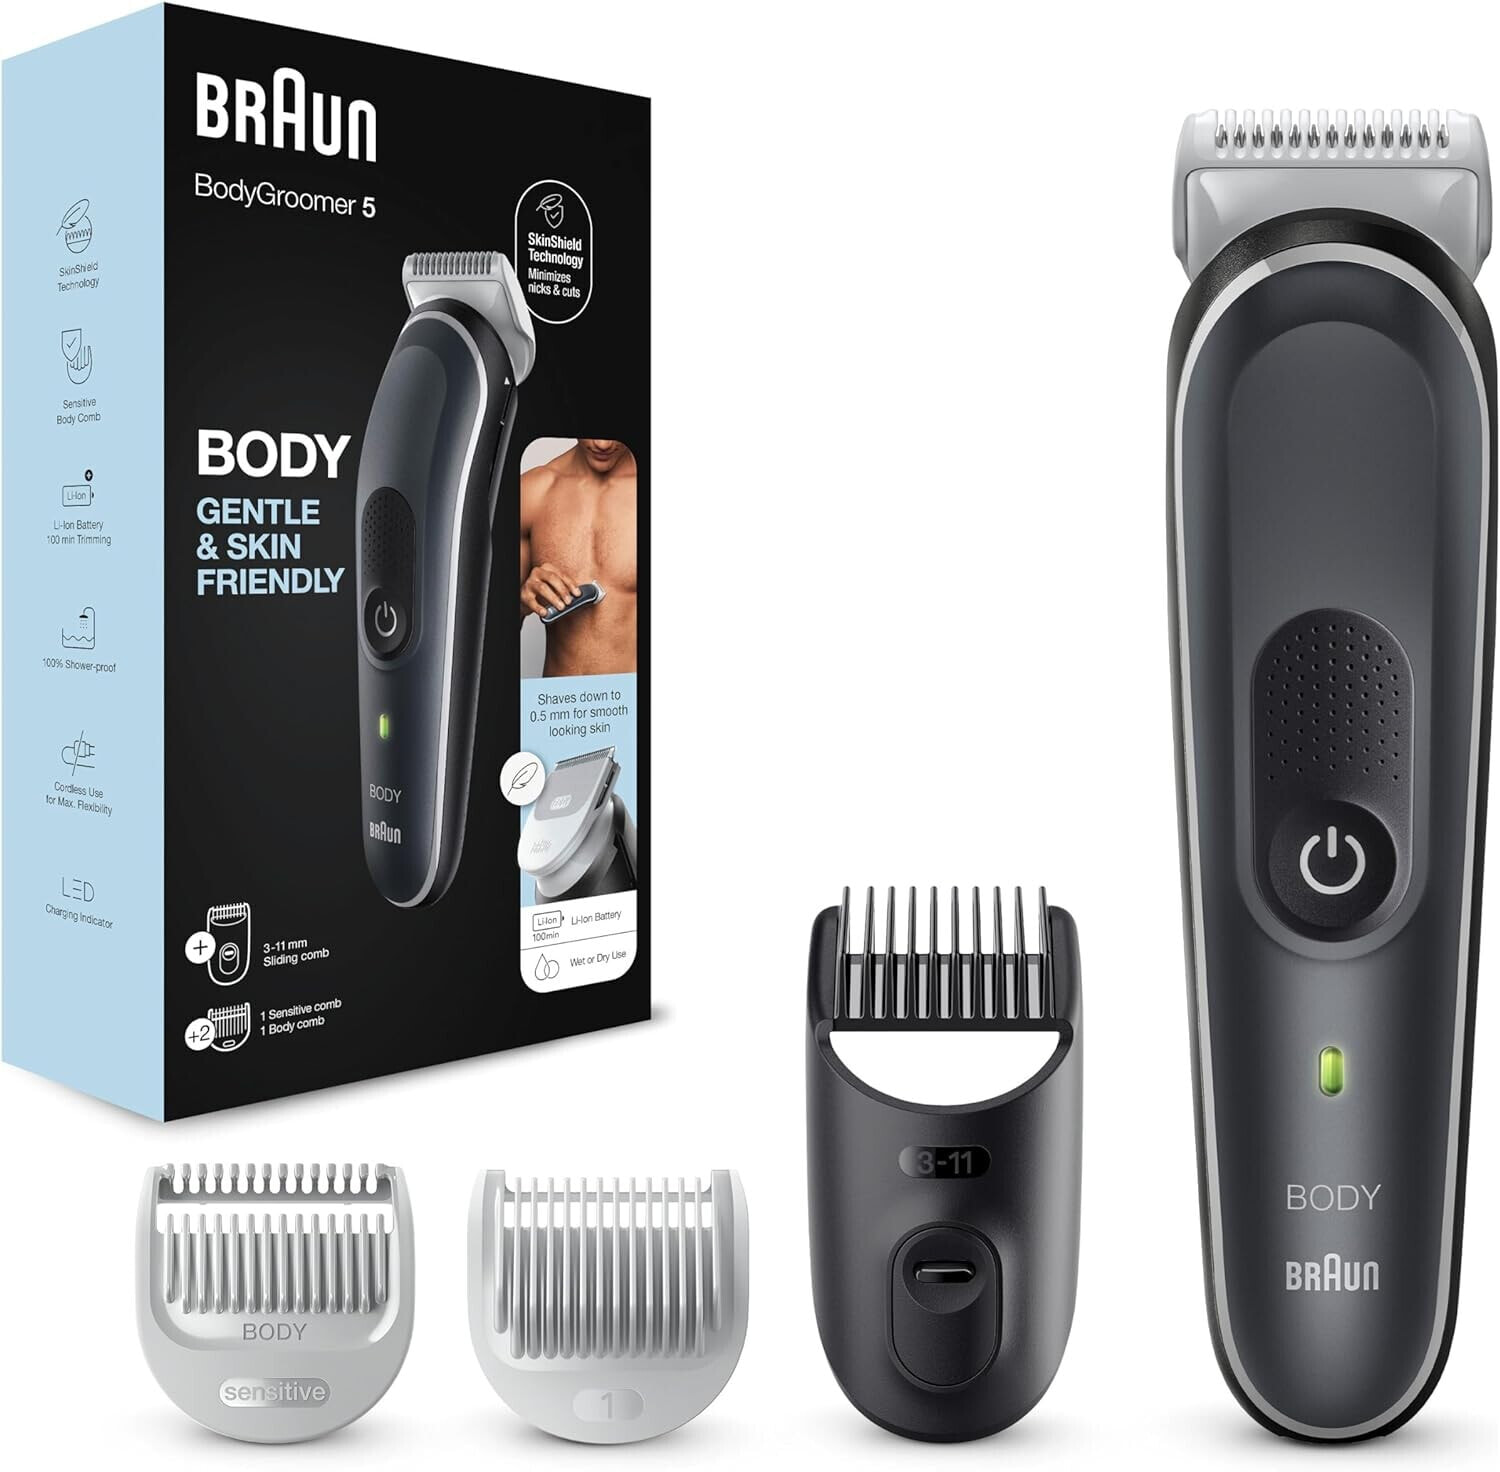 Braun Series 5 Body Groomer / Intimate Shaver for Men, Body Care and Hair Removal for Men, for Chest, Armpits, Comb Attachments 1-11 mm, 100 Minutes Runtime, Valentine's Day Gift for Him, BG5340